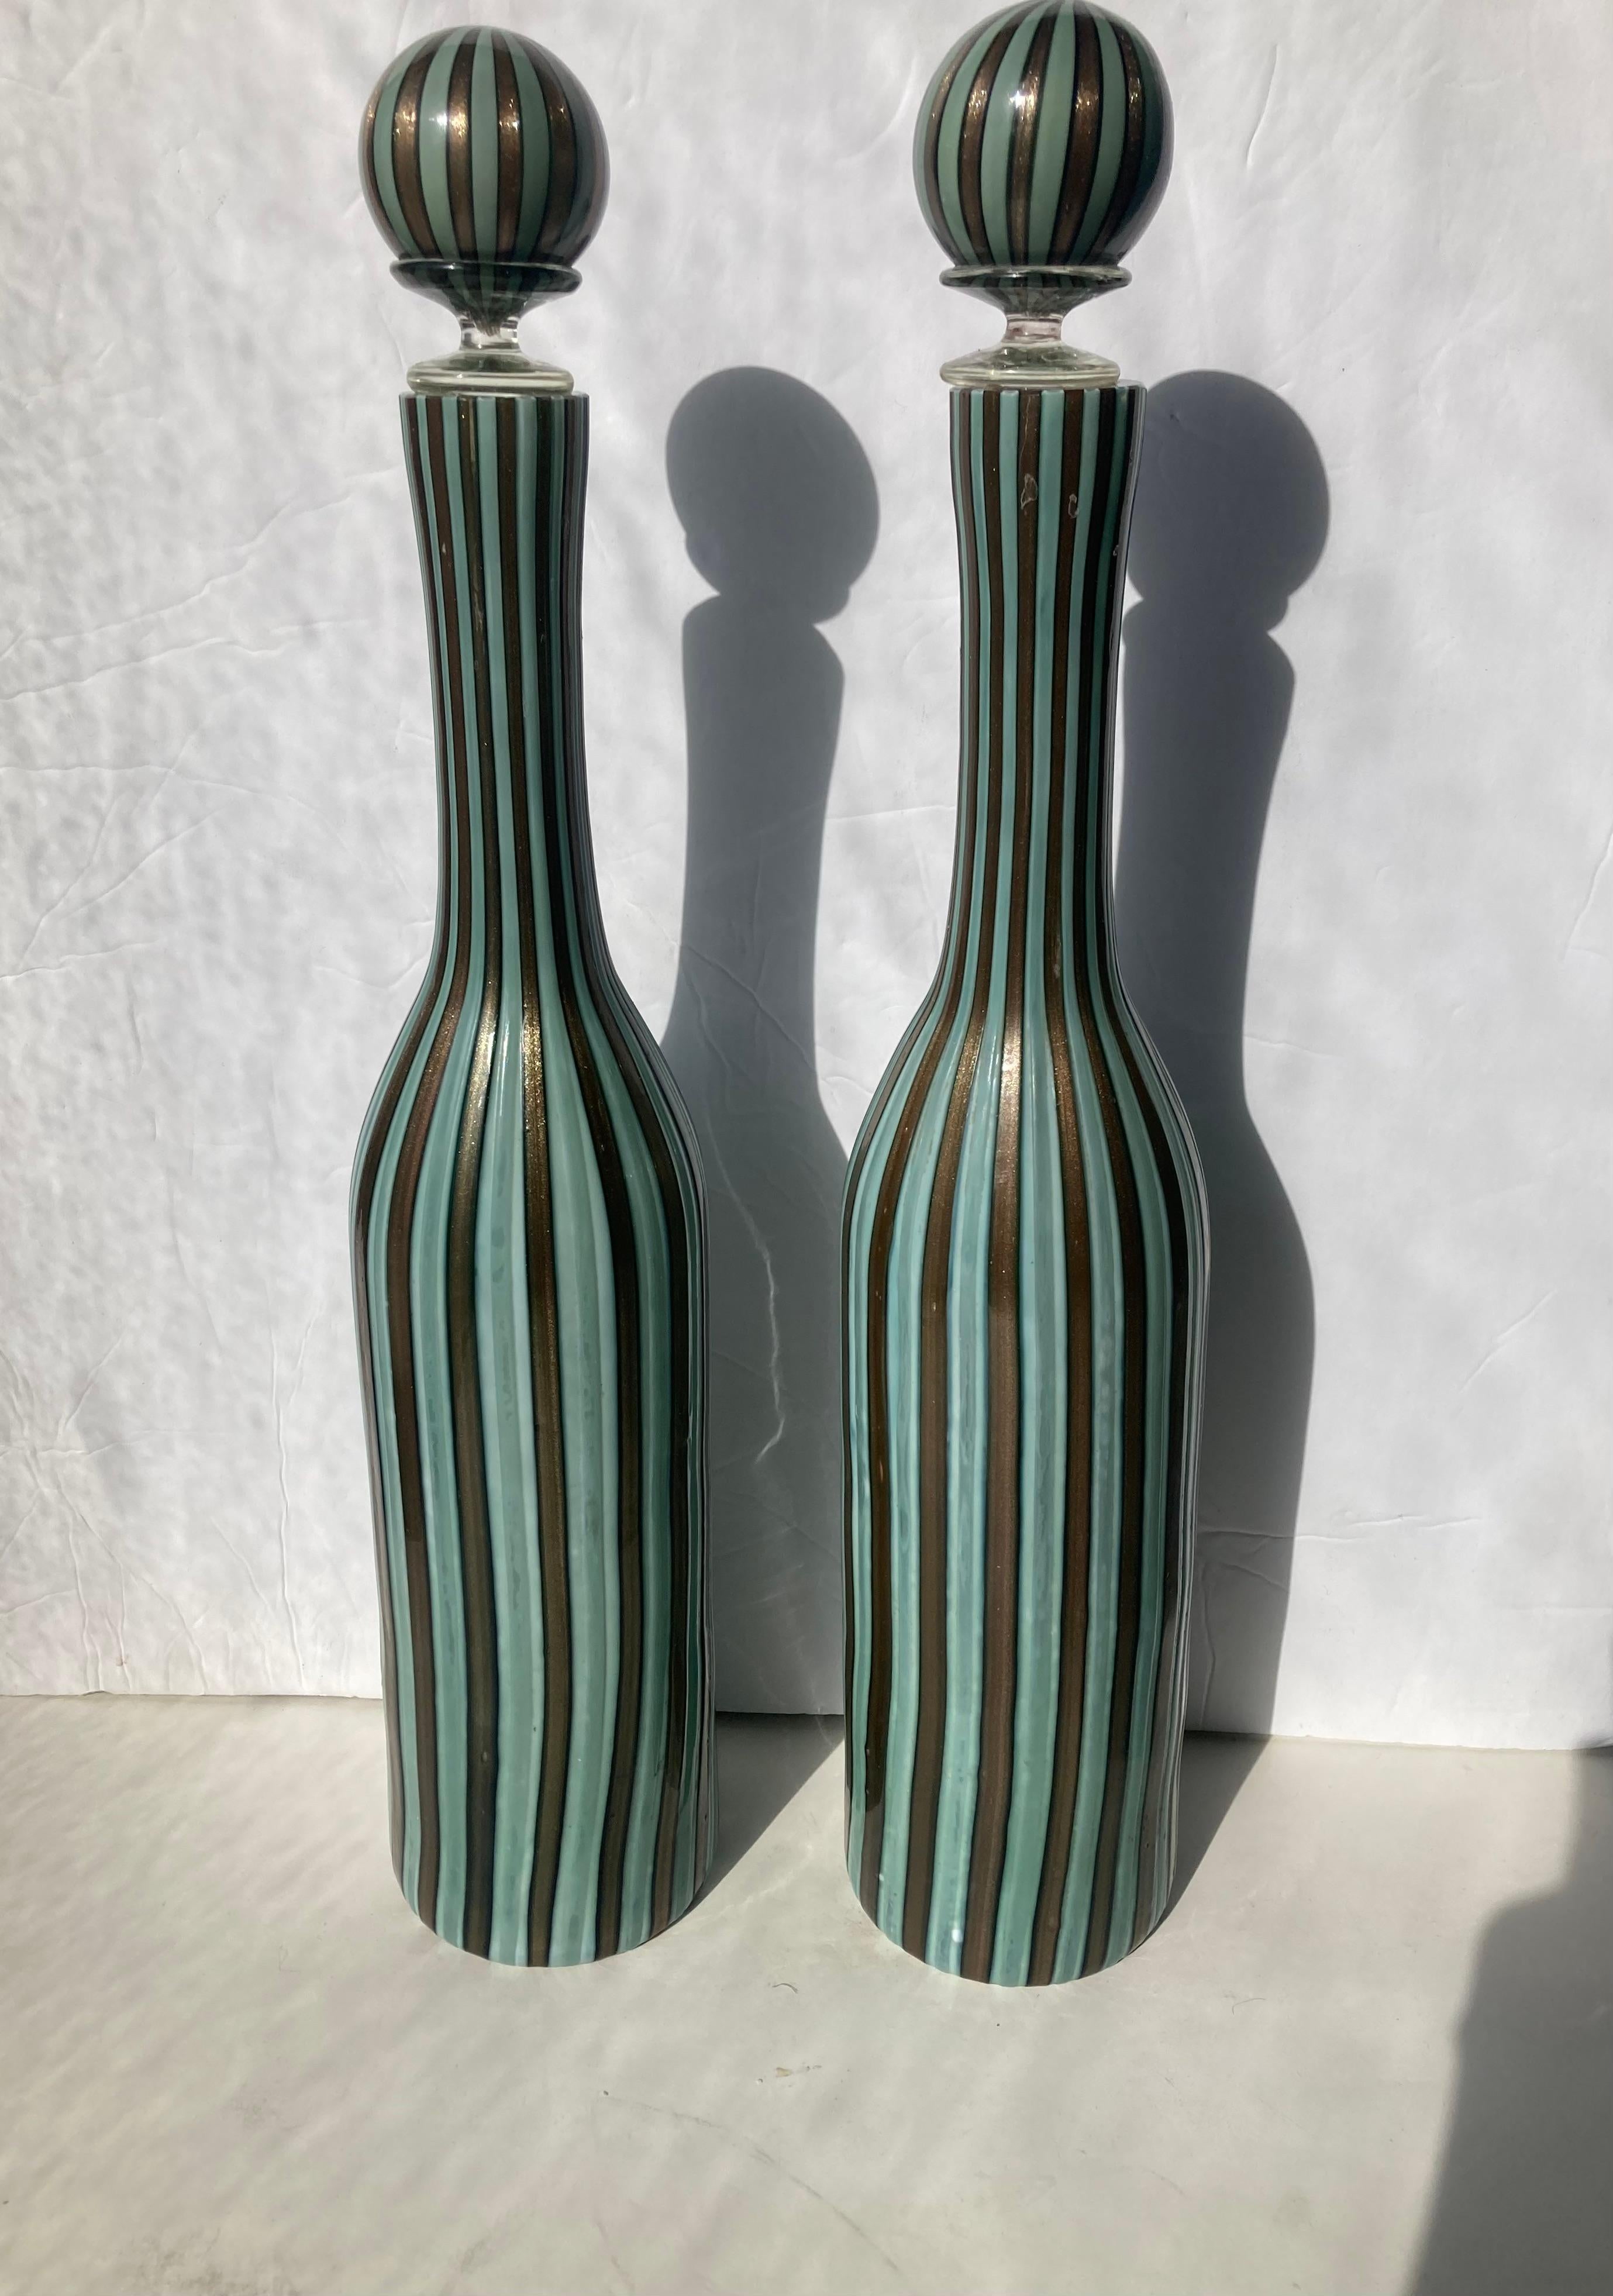 Rare pair of Murano decanters with stopper in this canned glass work. each measures approximately 18 inches high by 3.5 diameter. All Murano like these are hand made and the old saying is 